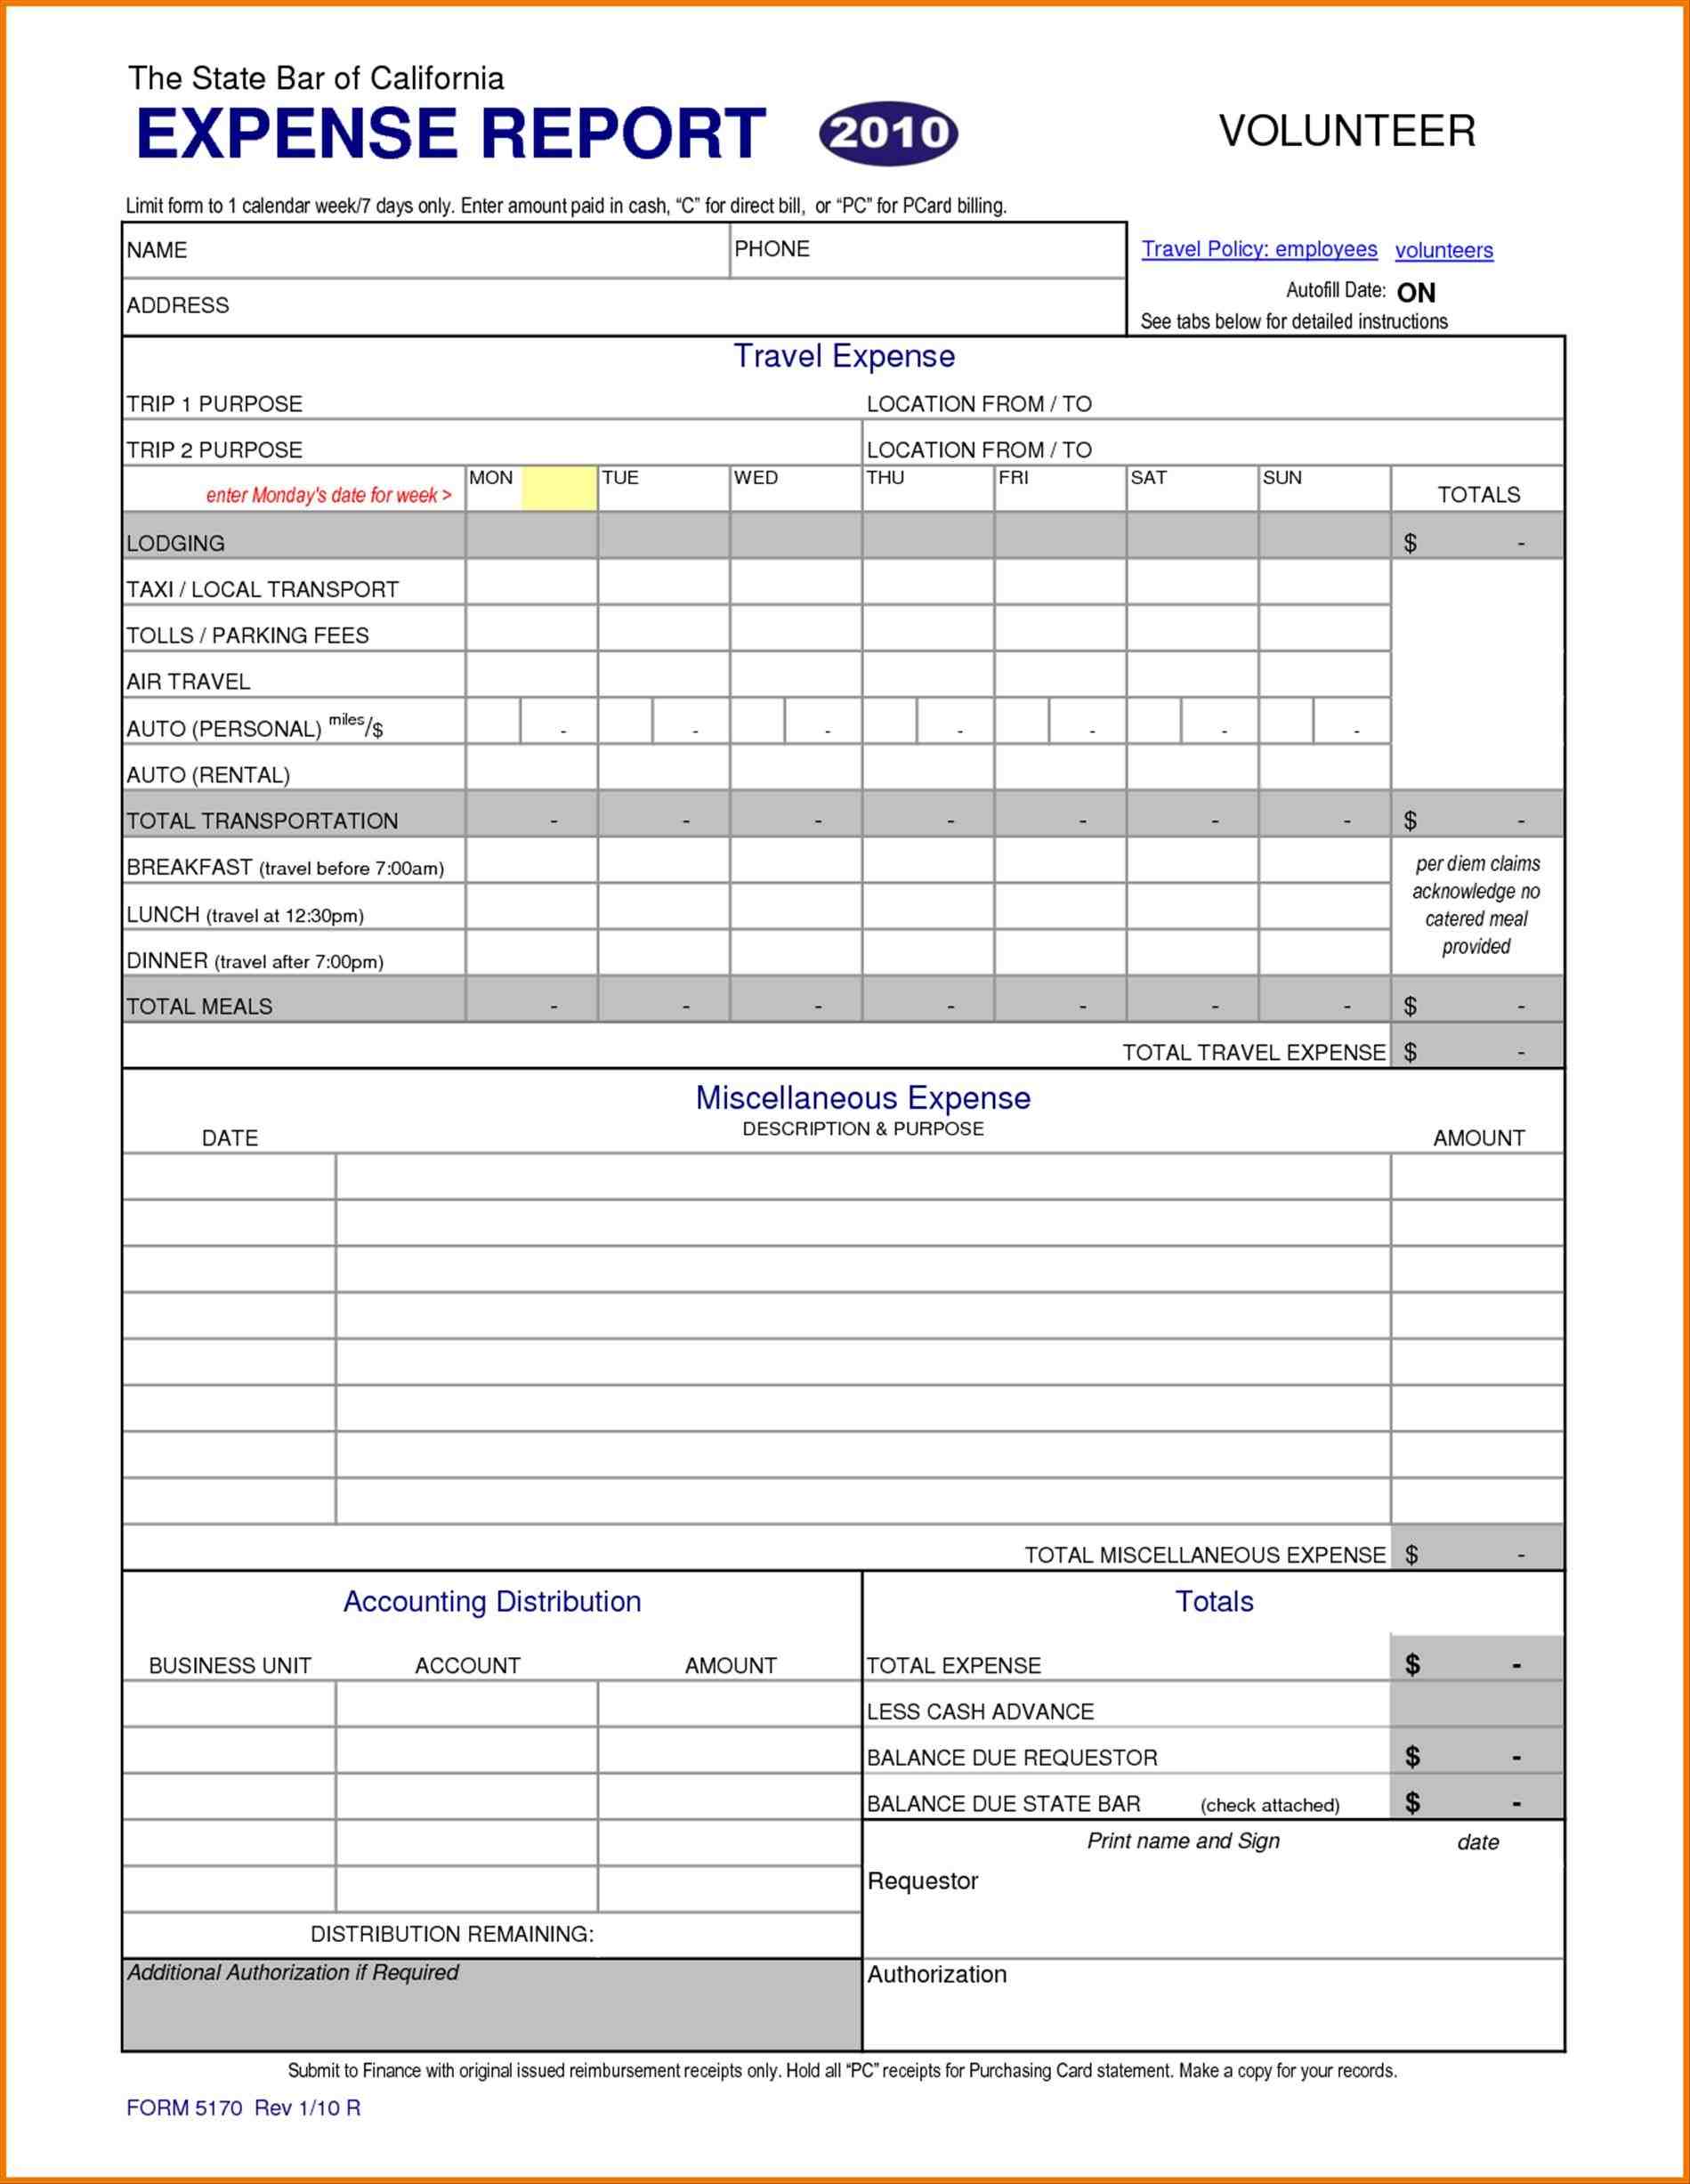 expenses commonpenceco expense report and sheet template for non travel monthly Monthly Expense Report Template business expense report and sheet